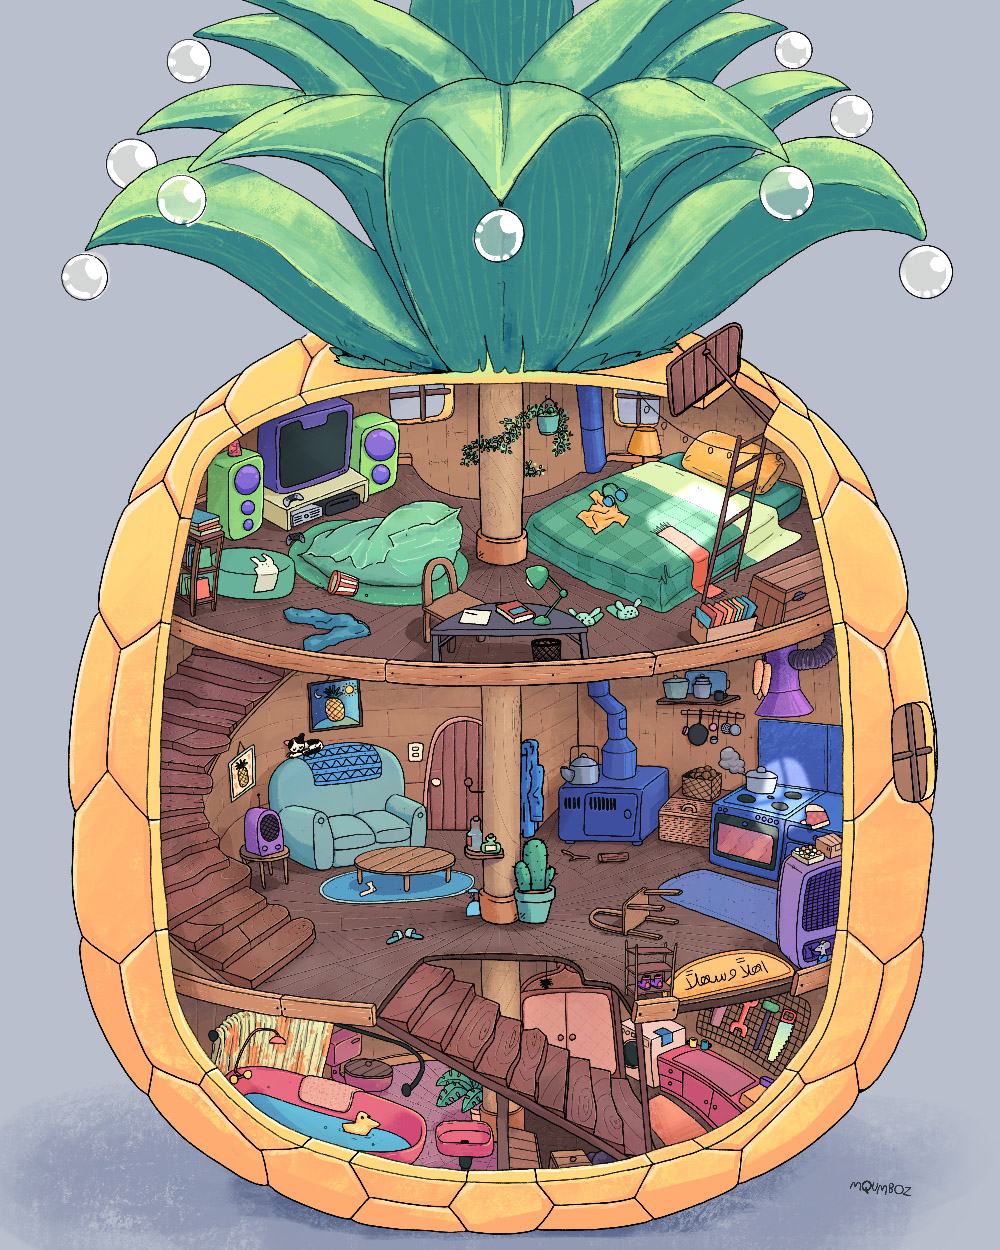 Cross section of a house built within a pineapple.